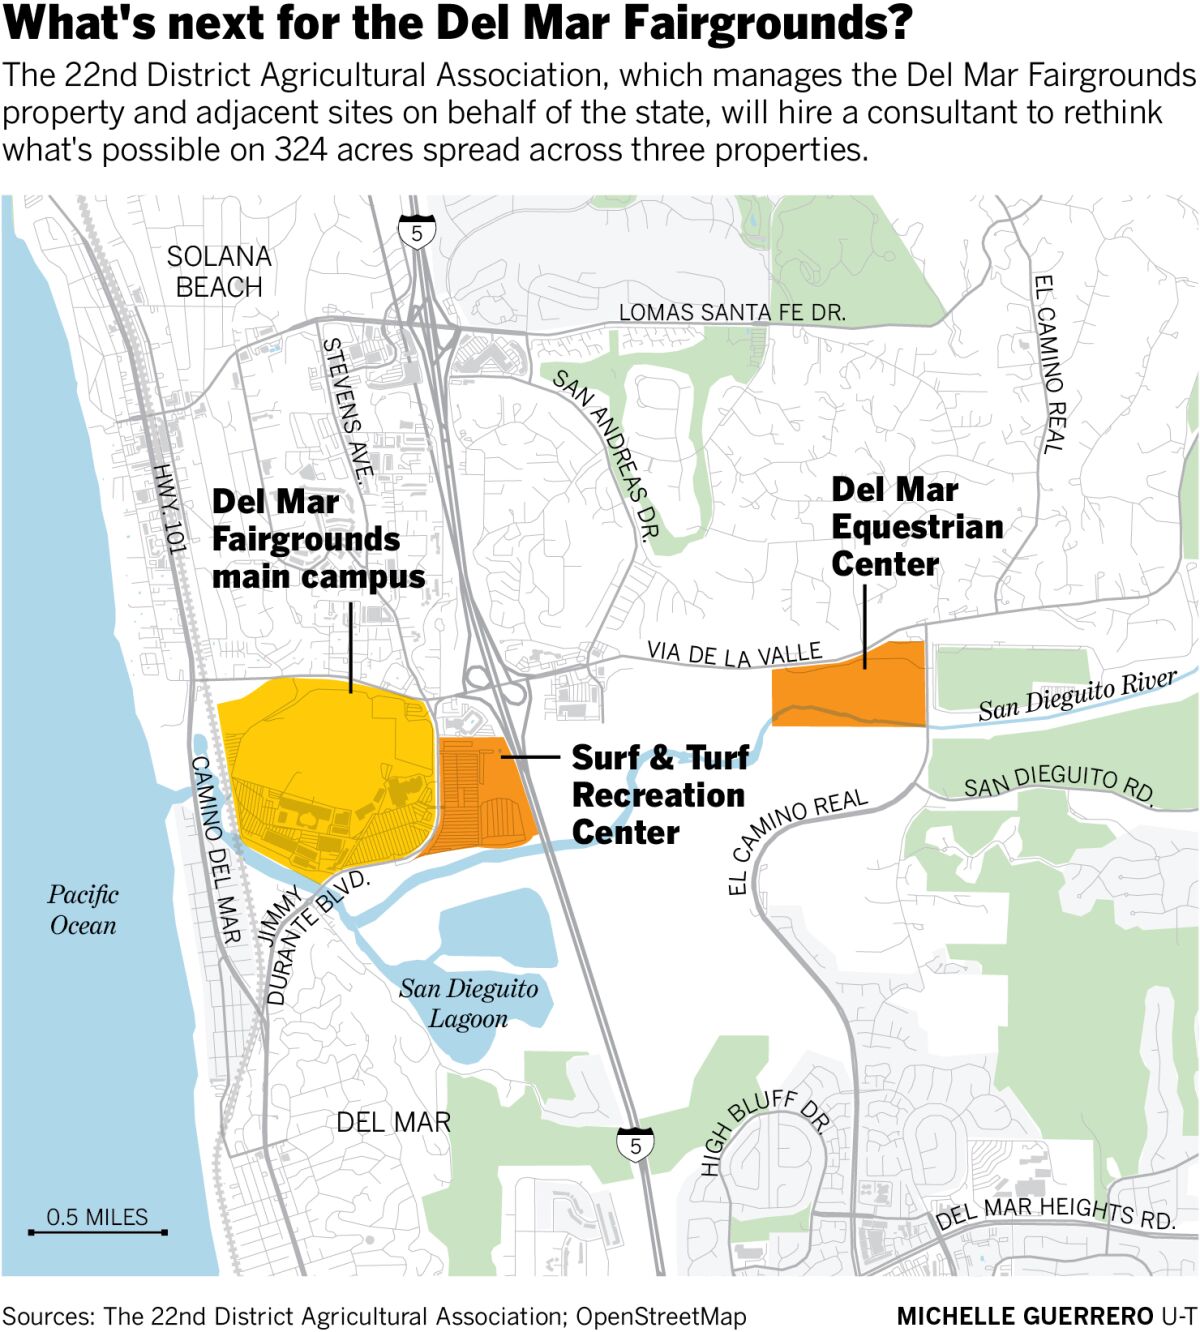 Del Mar Fairgrounds ready to rethink entire property. 'Don't worry